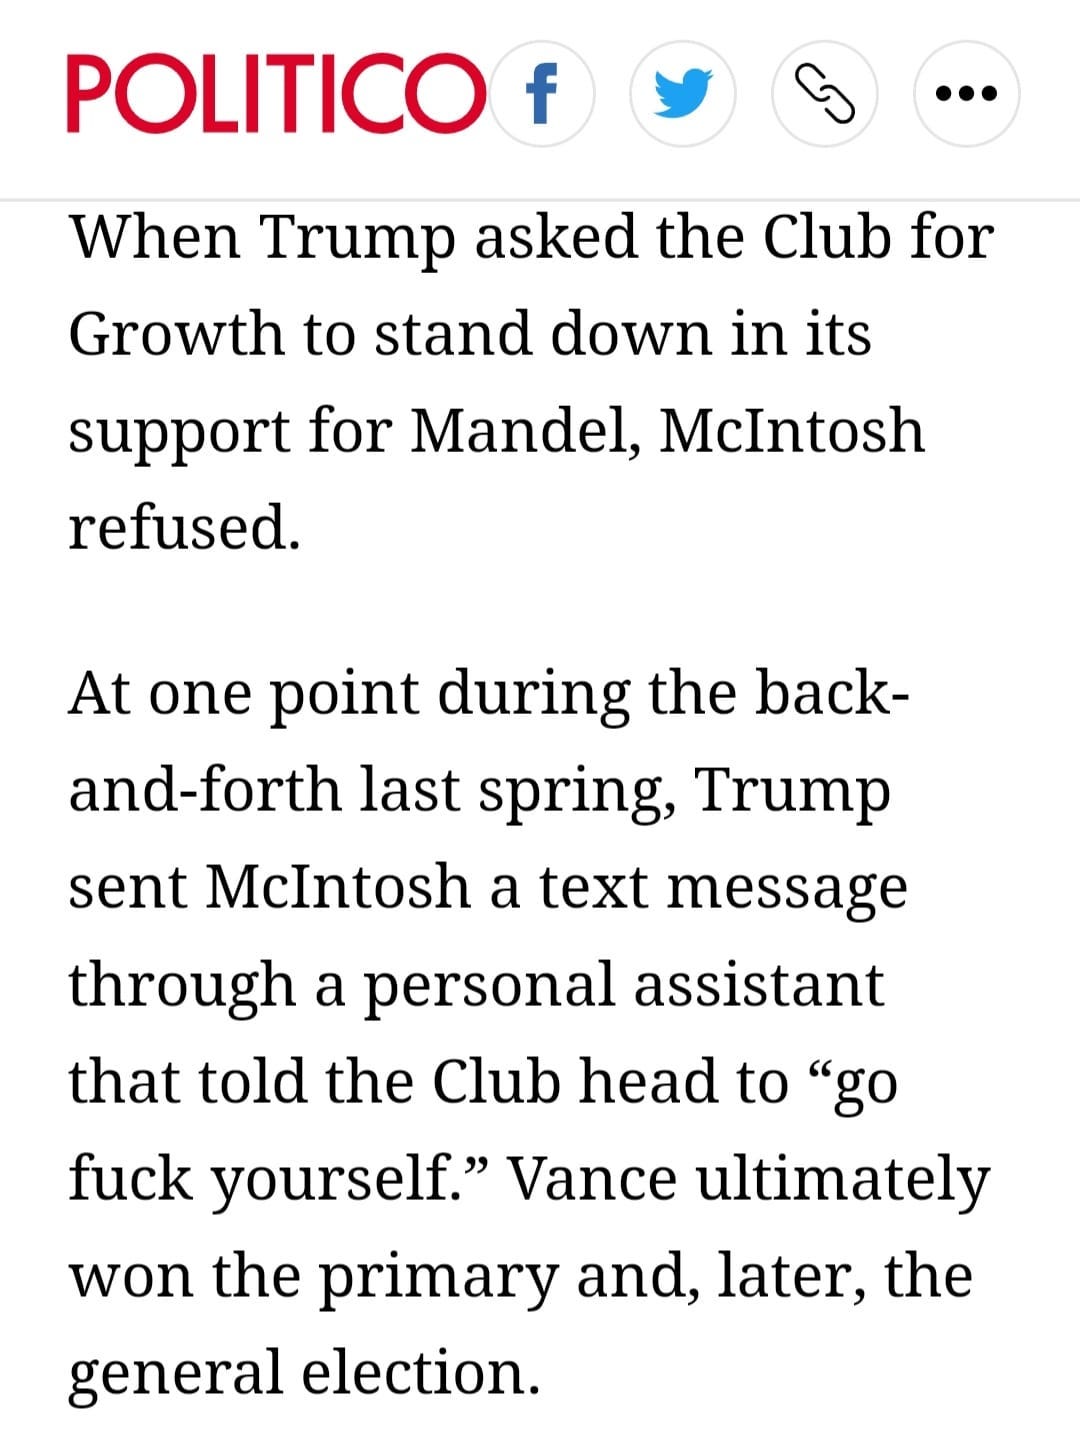 May be an image of text that says 'POLITICO f When Trump asked the Club for Growth to stand down in its support for Mandel, McIntosh refused. At one point during the back- and-forth last spring, Trump sent McIntosh a text message through a personal assistant that told the Club head to "go fuck yourself." Vance ultimately won the primary and, later, the general election.'